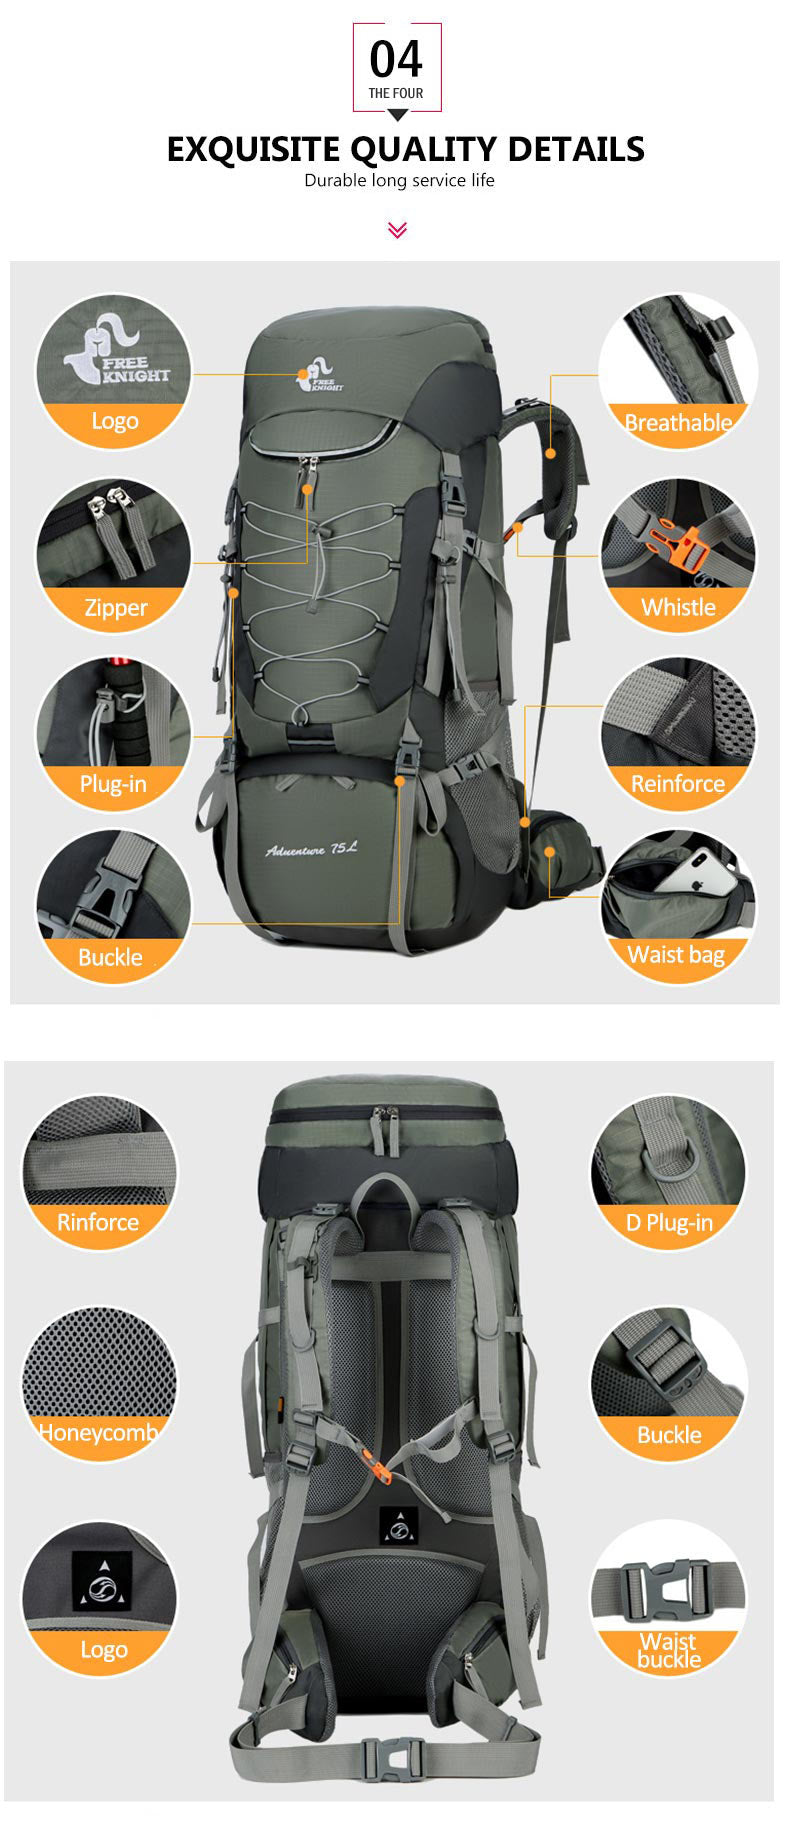 75L Camping Backpack Hiking Bag Sport Outdoor Bags With Rain Cover for Travel Climbing Mountaineering Trekking Camping Bag XA726WA